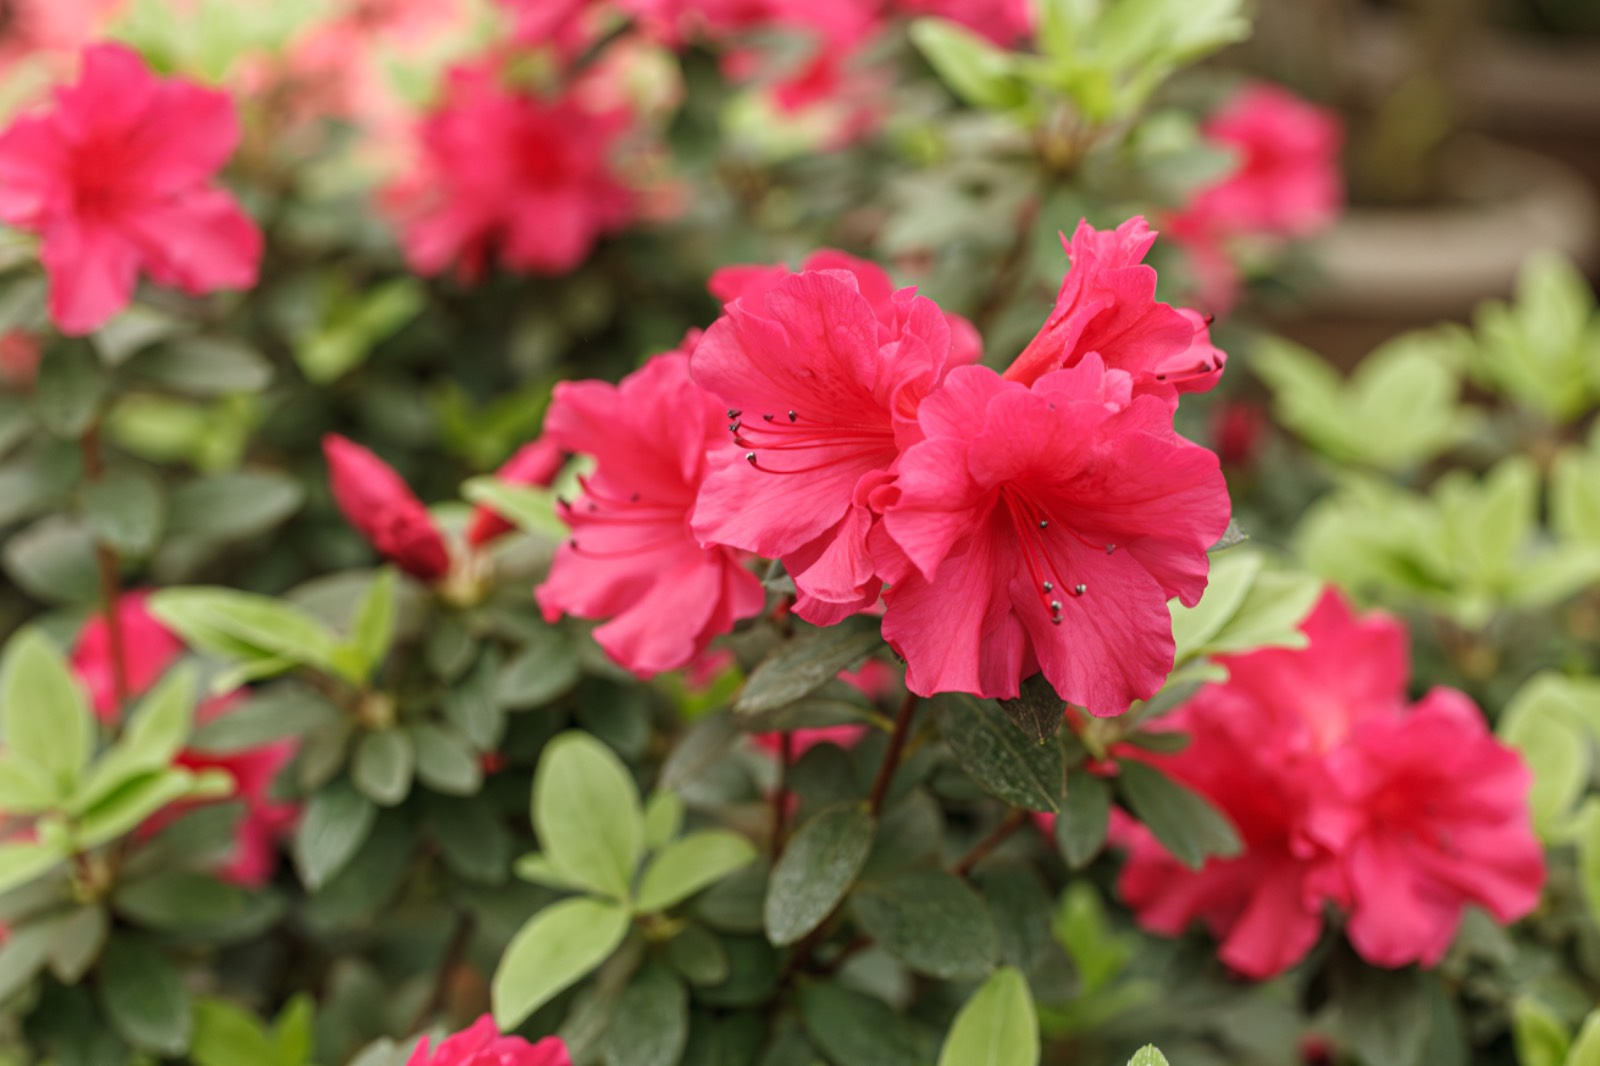 Marietta’s Marvelous Azaleas: Planting, Care, and Blooming Beauty